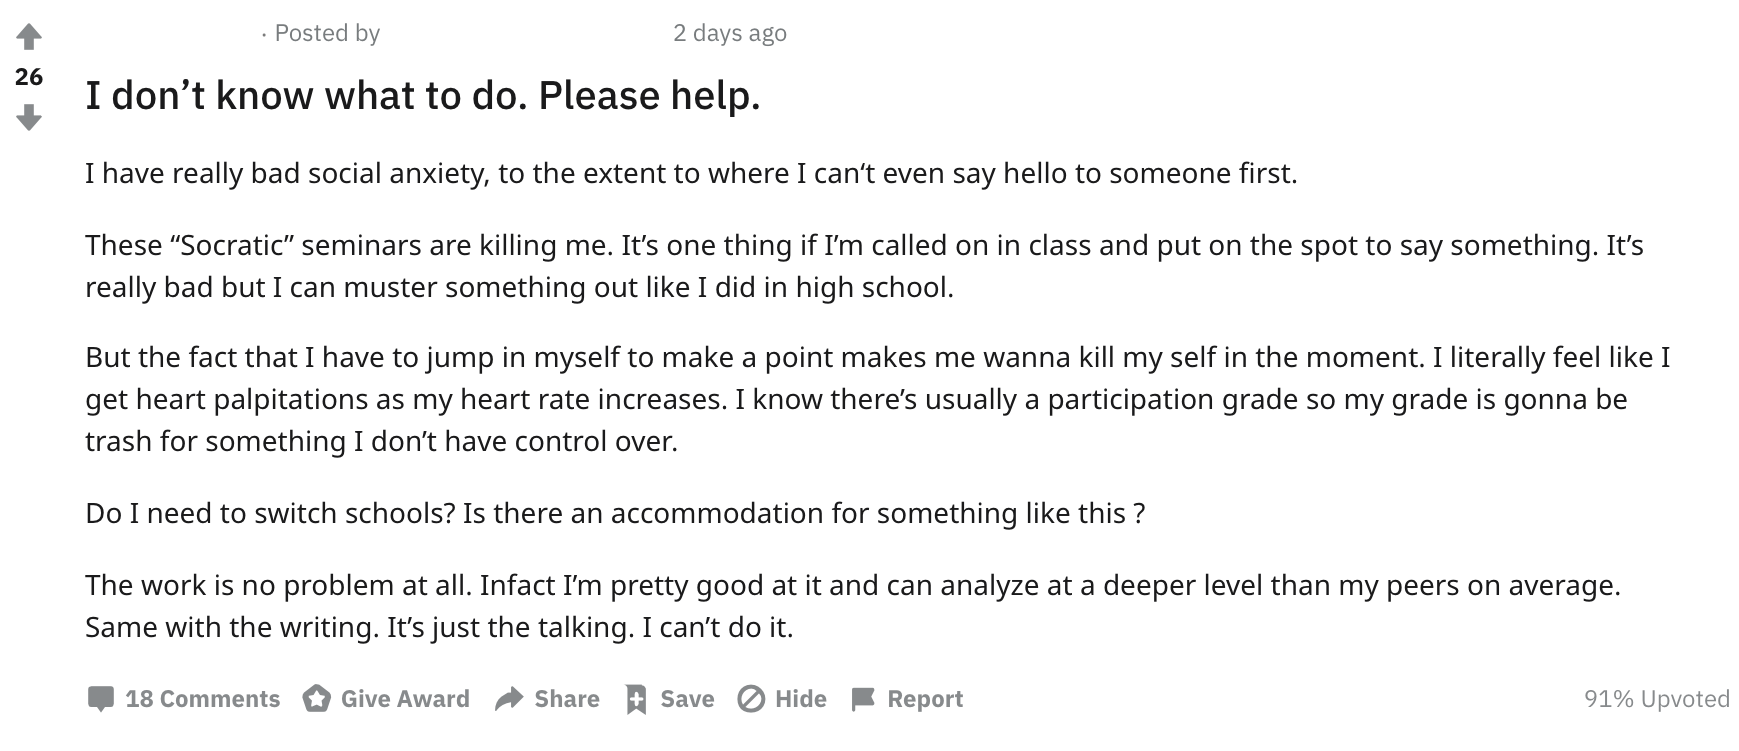 Reddit post with the subject "I don't know what to do. Please help."